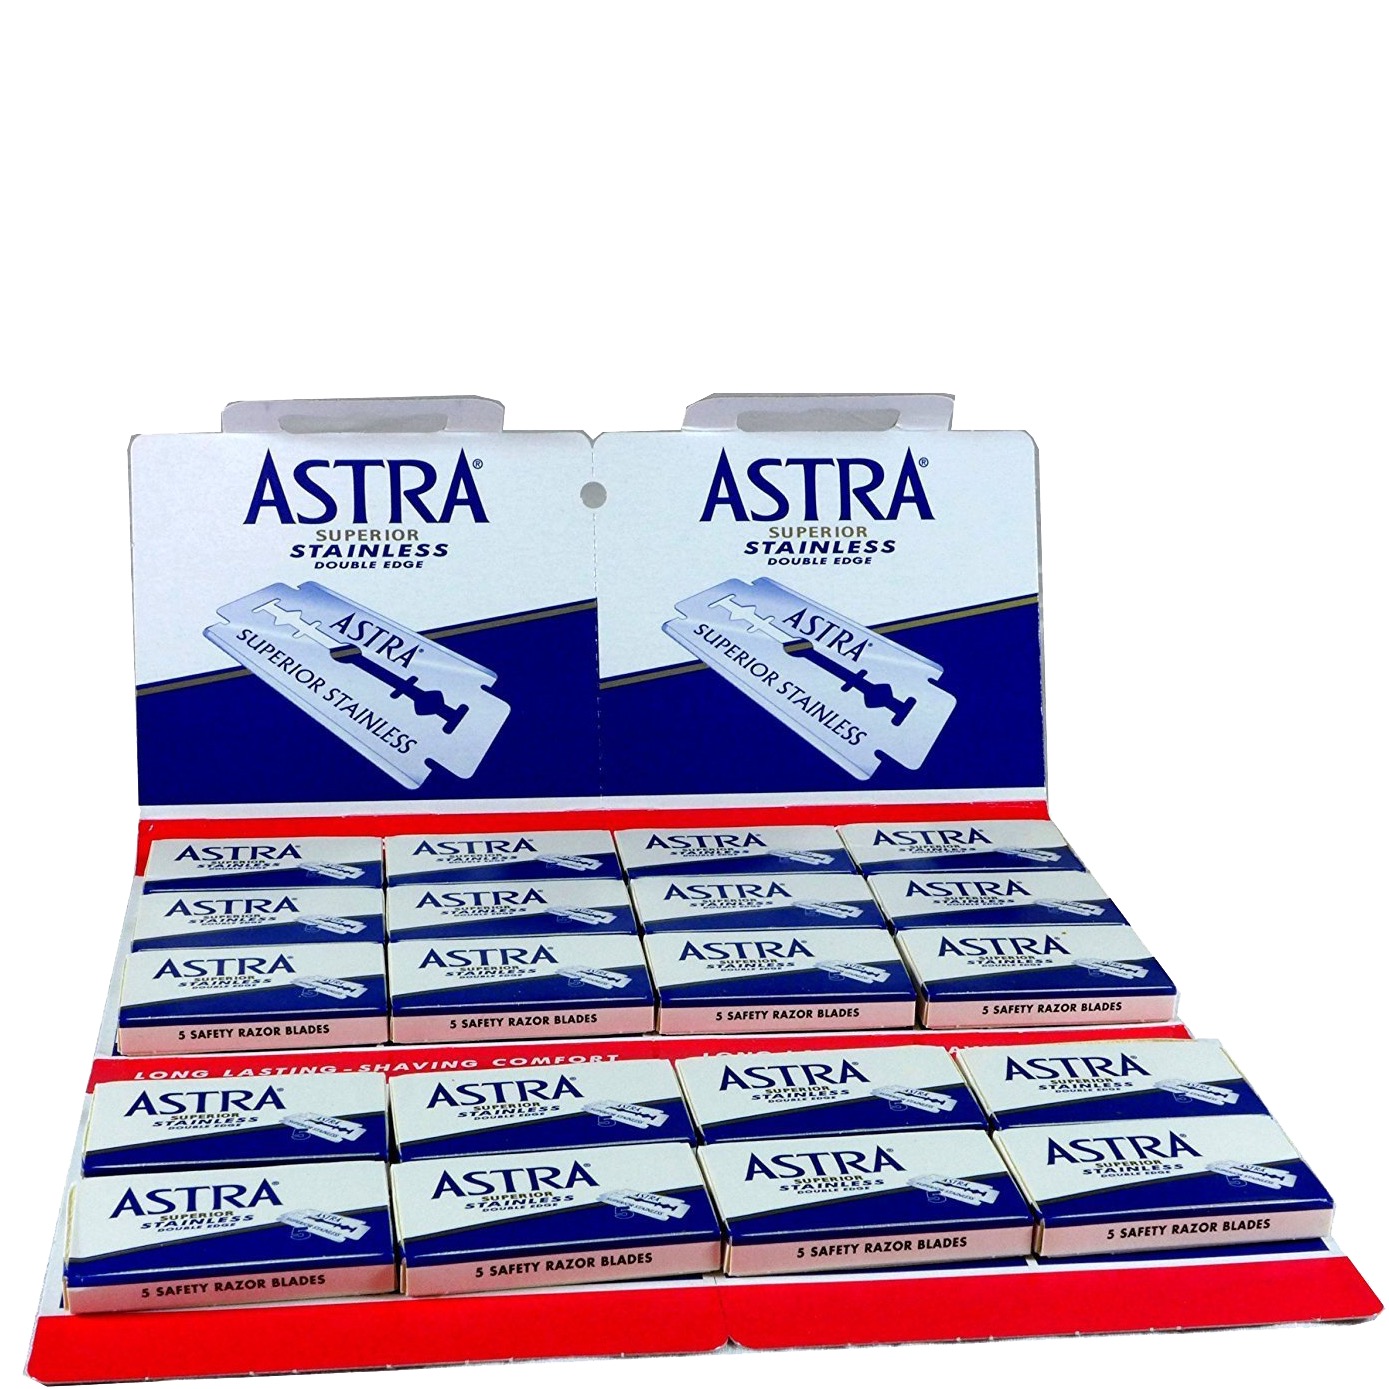 Astra Stainless grootverpakking double edge blades - 1.2 - 1PACK-ASTRA-STAINLESS